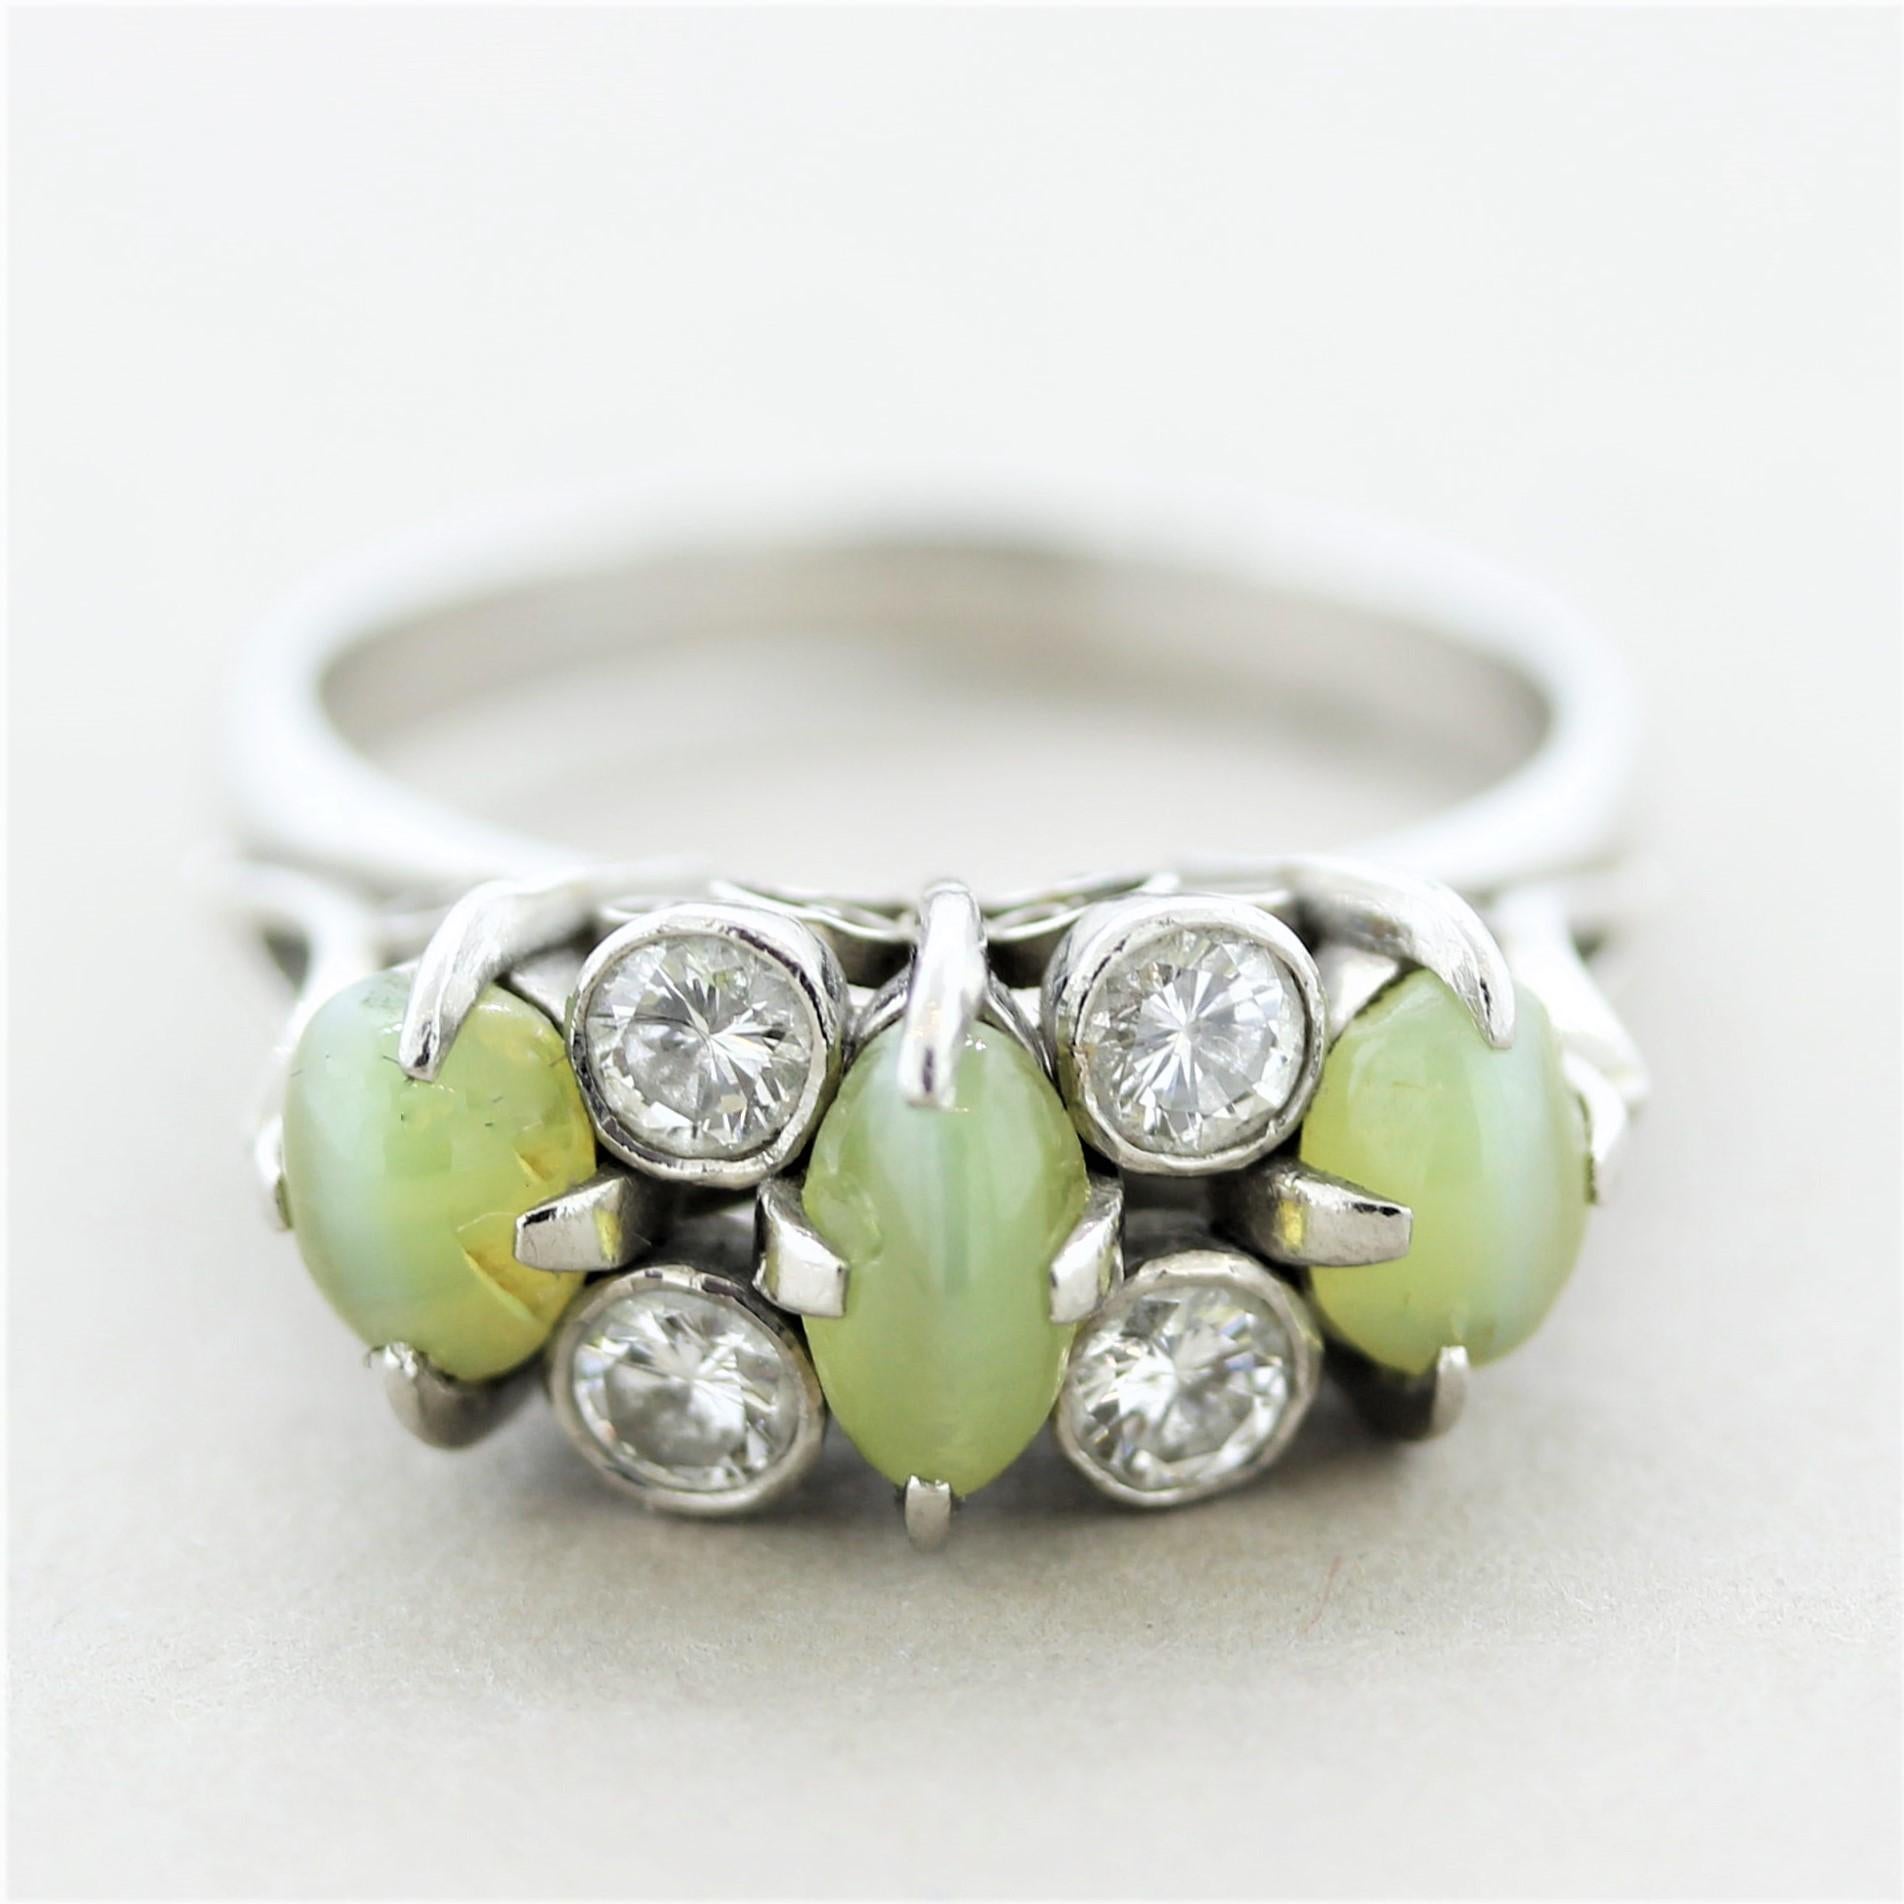 A unique and stylish ring, circa 1960’s, featuring 3 cats eye chrysoberyls and 4 round brilliant-cut diamonds. Hand-fabricated in platinum and ready to be worn.

Ring Size 6.75